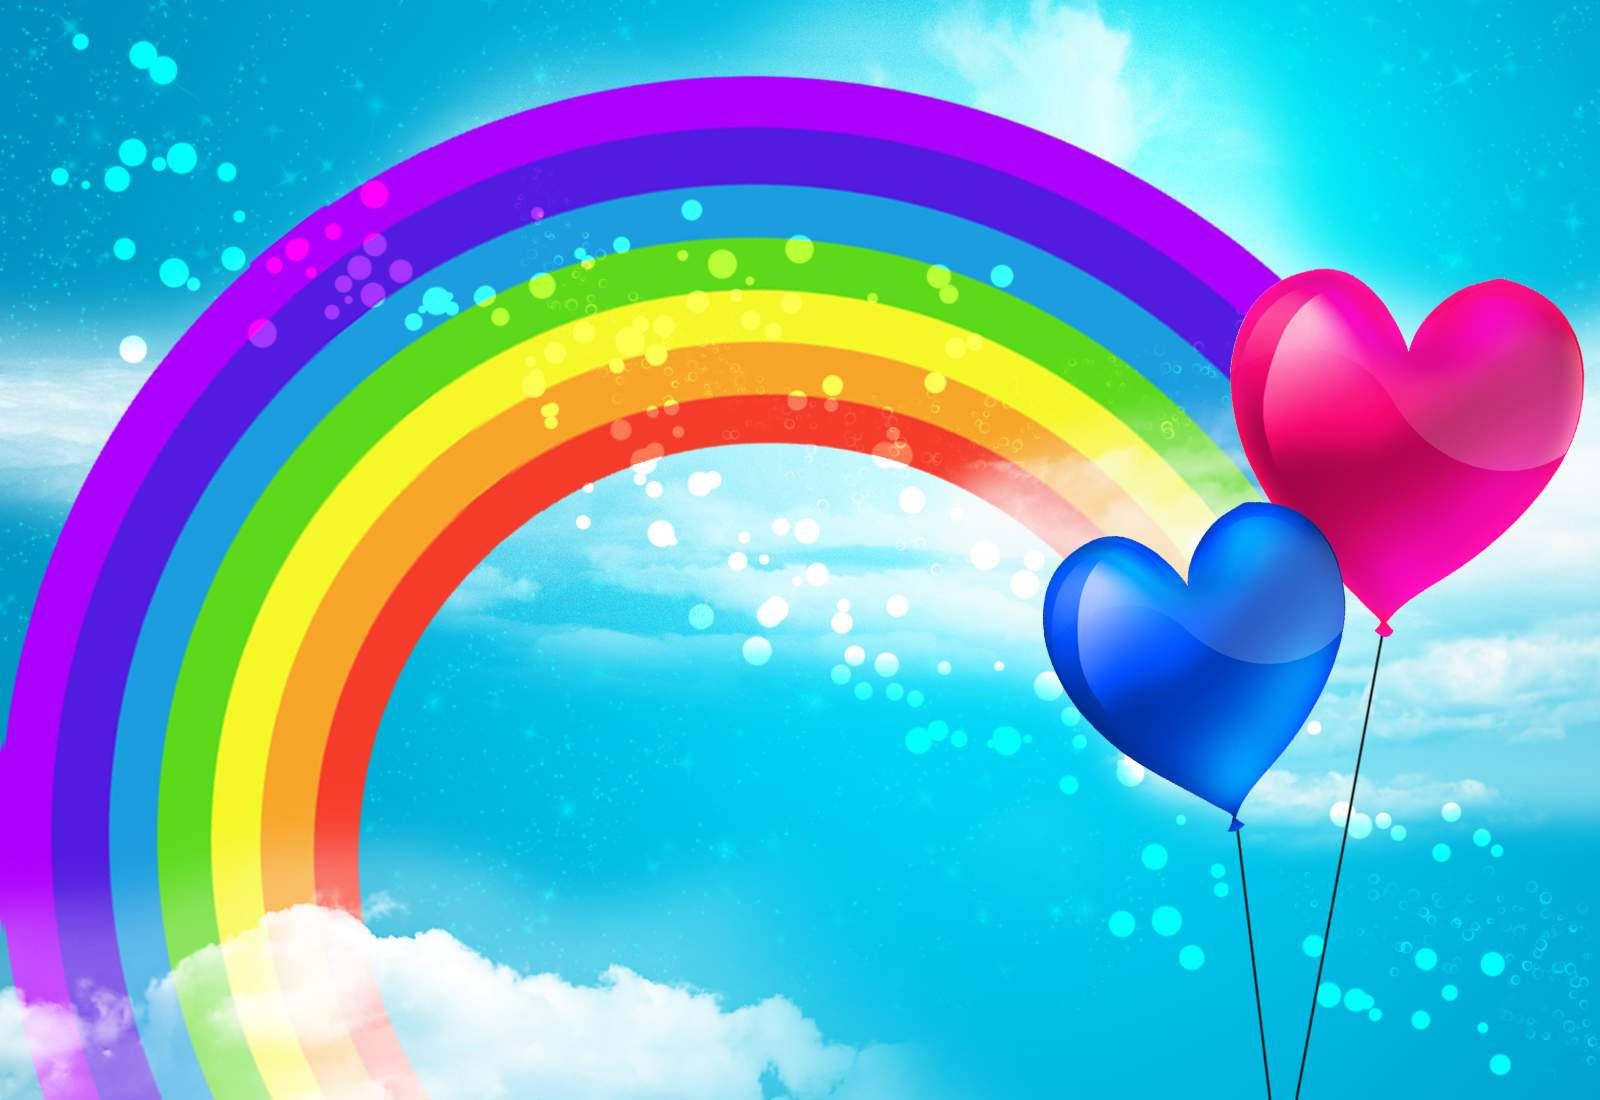 A Magical Rainbow in the Sky Wallpaper